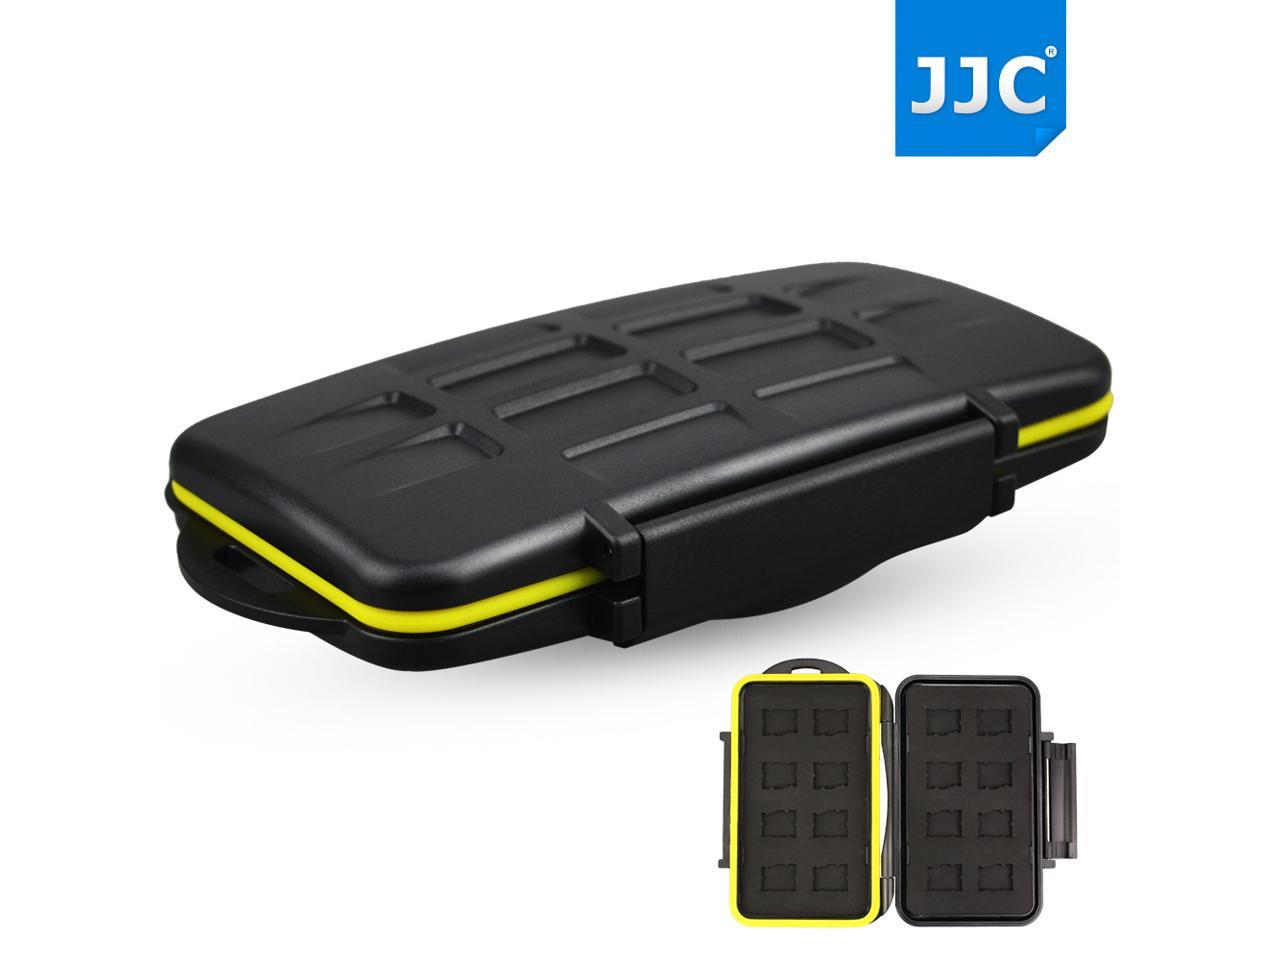 JJC MC-MSD16 Anti-shock Water-resistant Hard Holder Storage Camera Memory Card Case Protector For 16 PCS Micro SD Cards